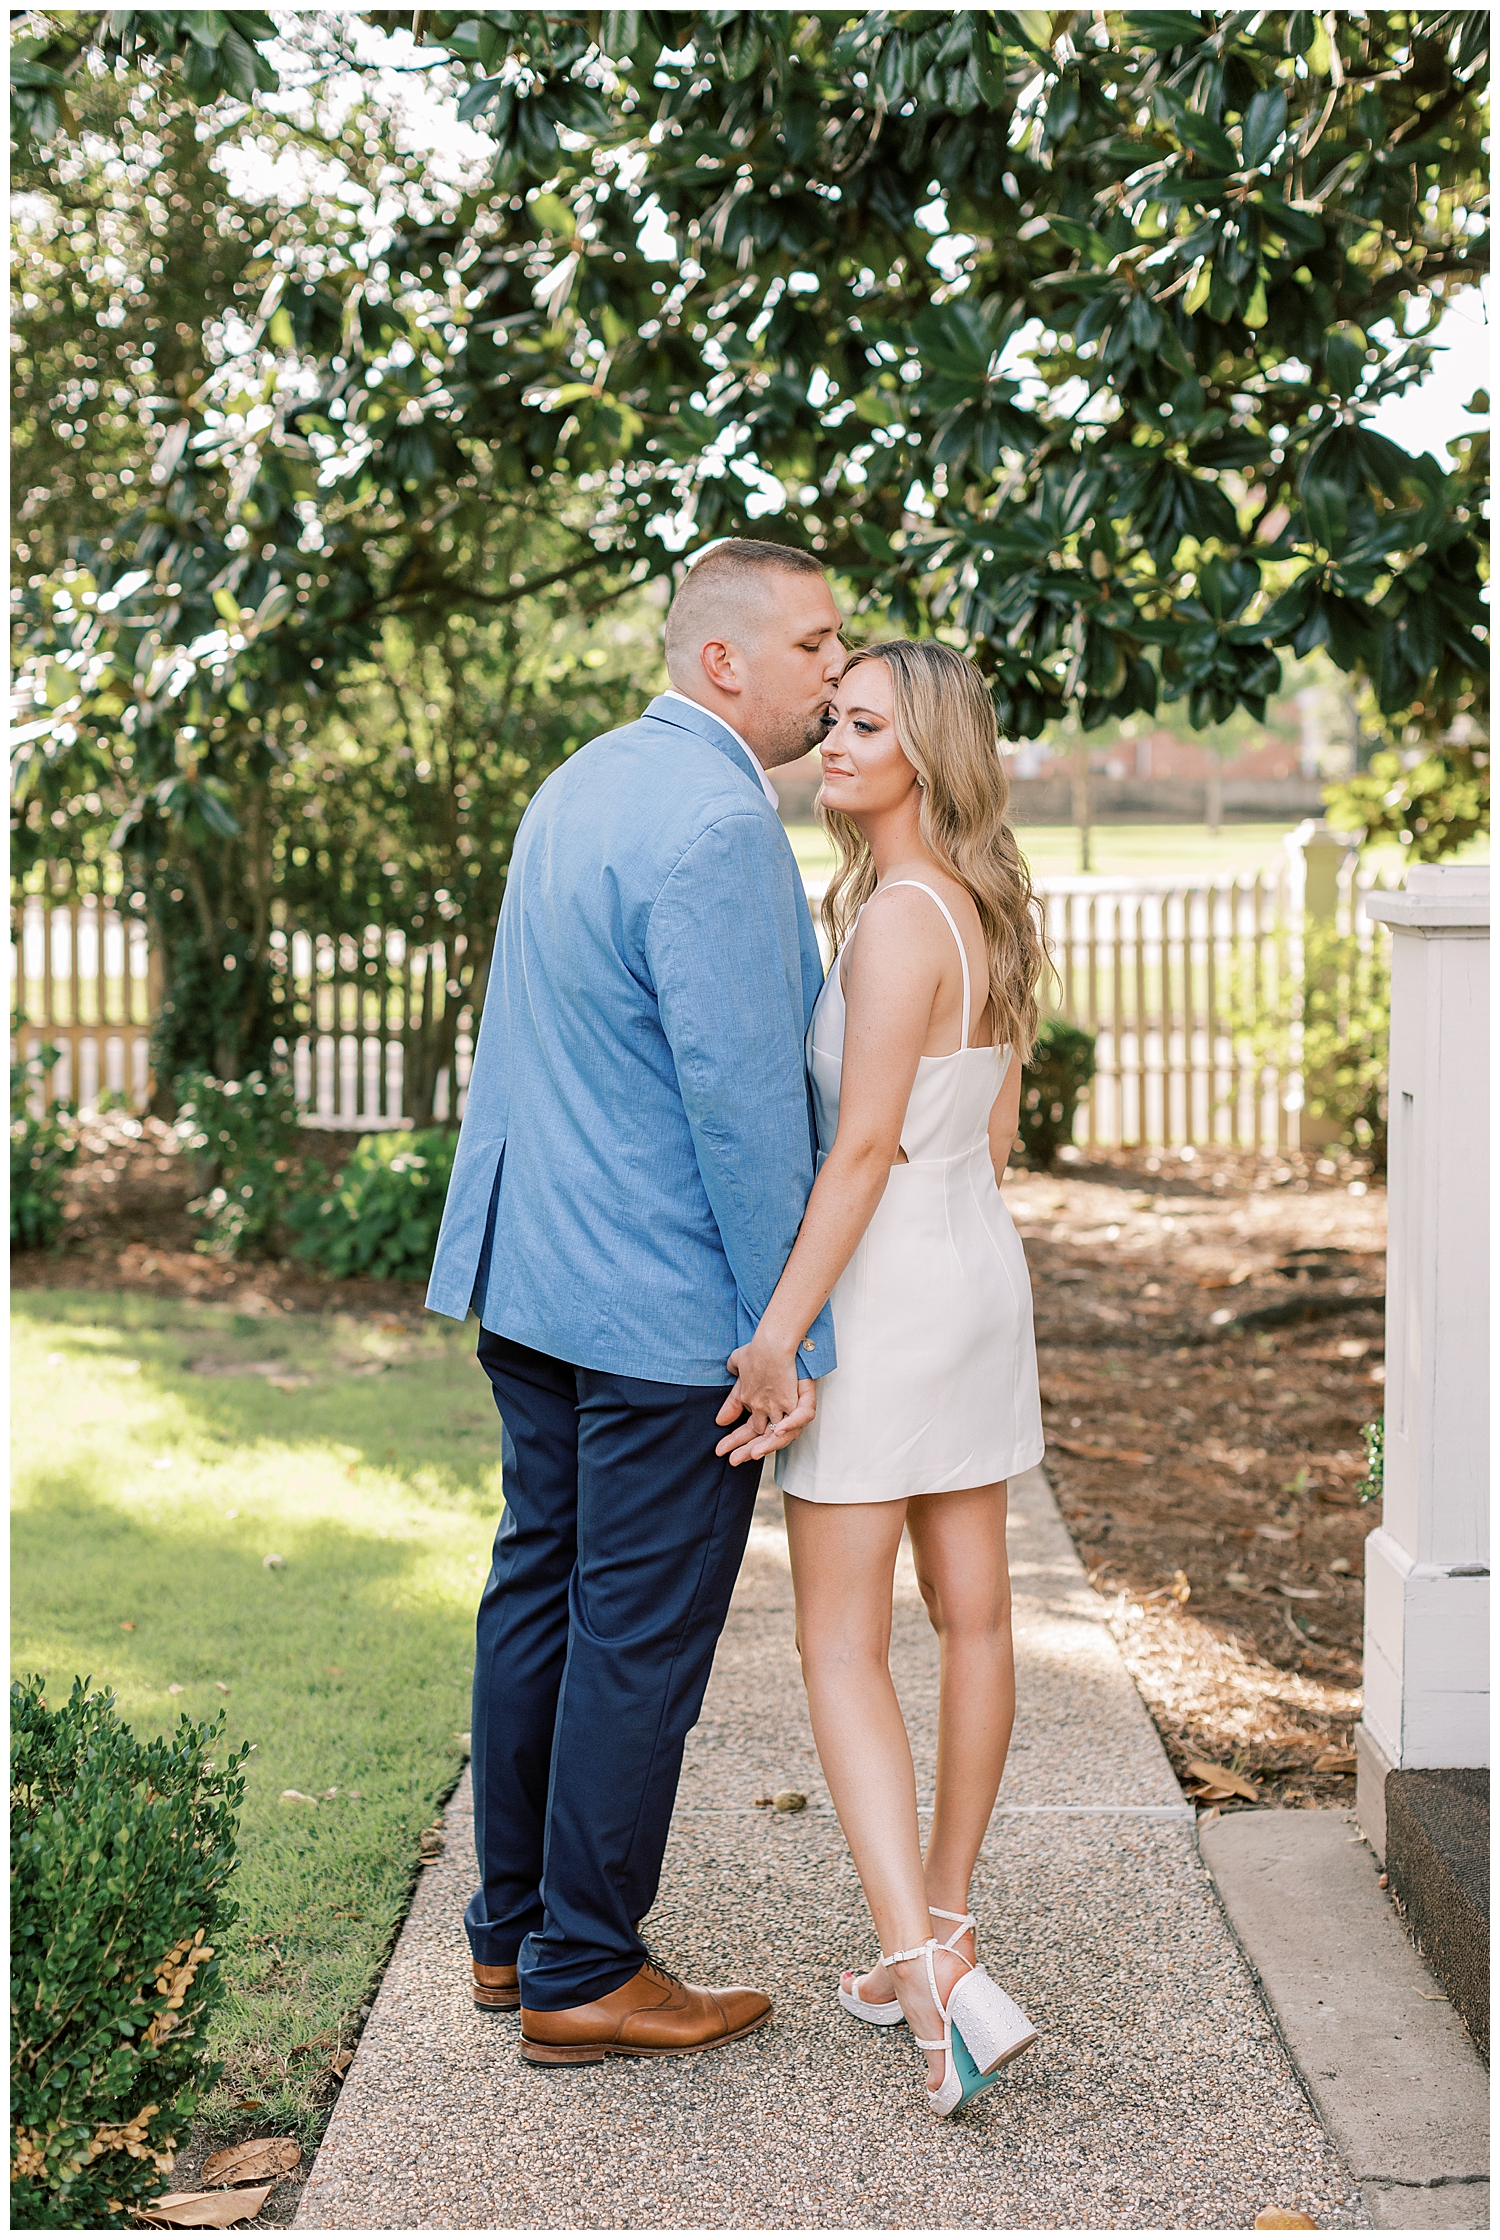 A couple kisses in front of a magnolia tree.